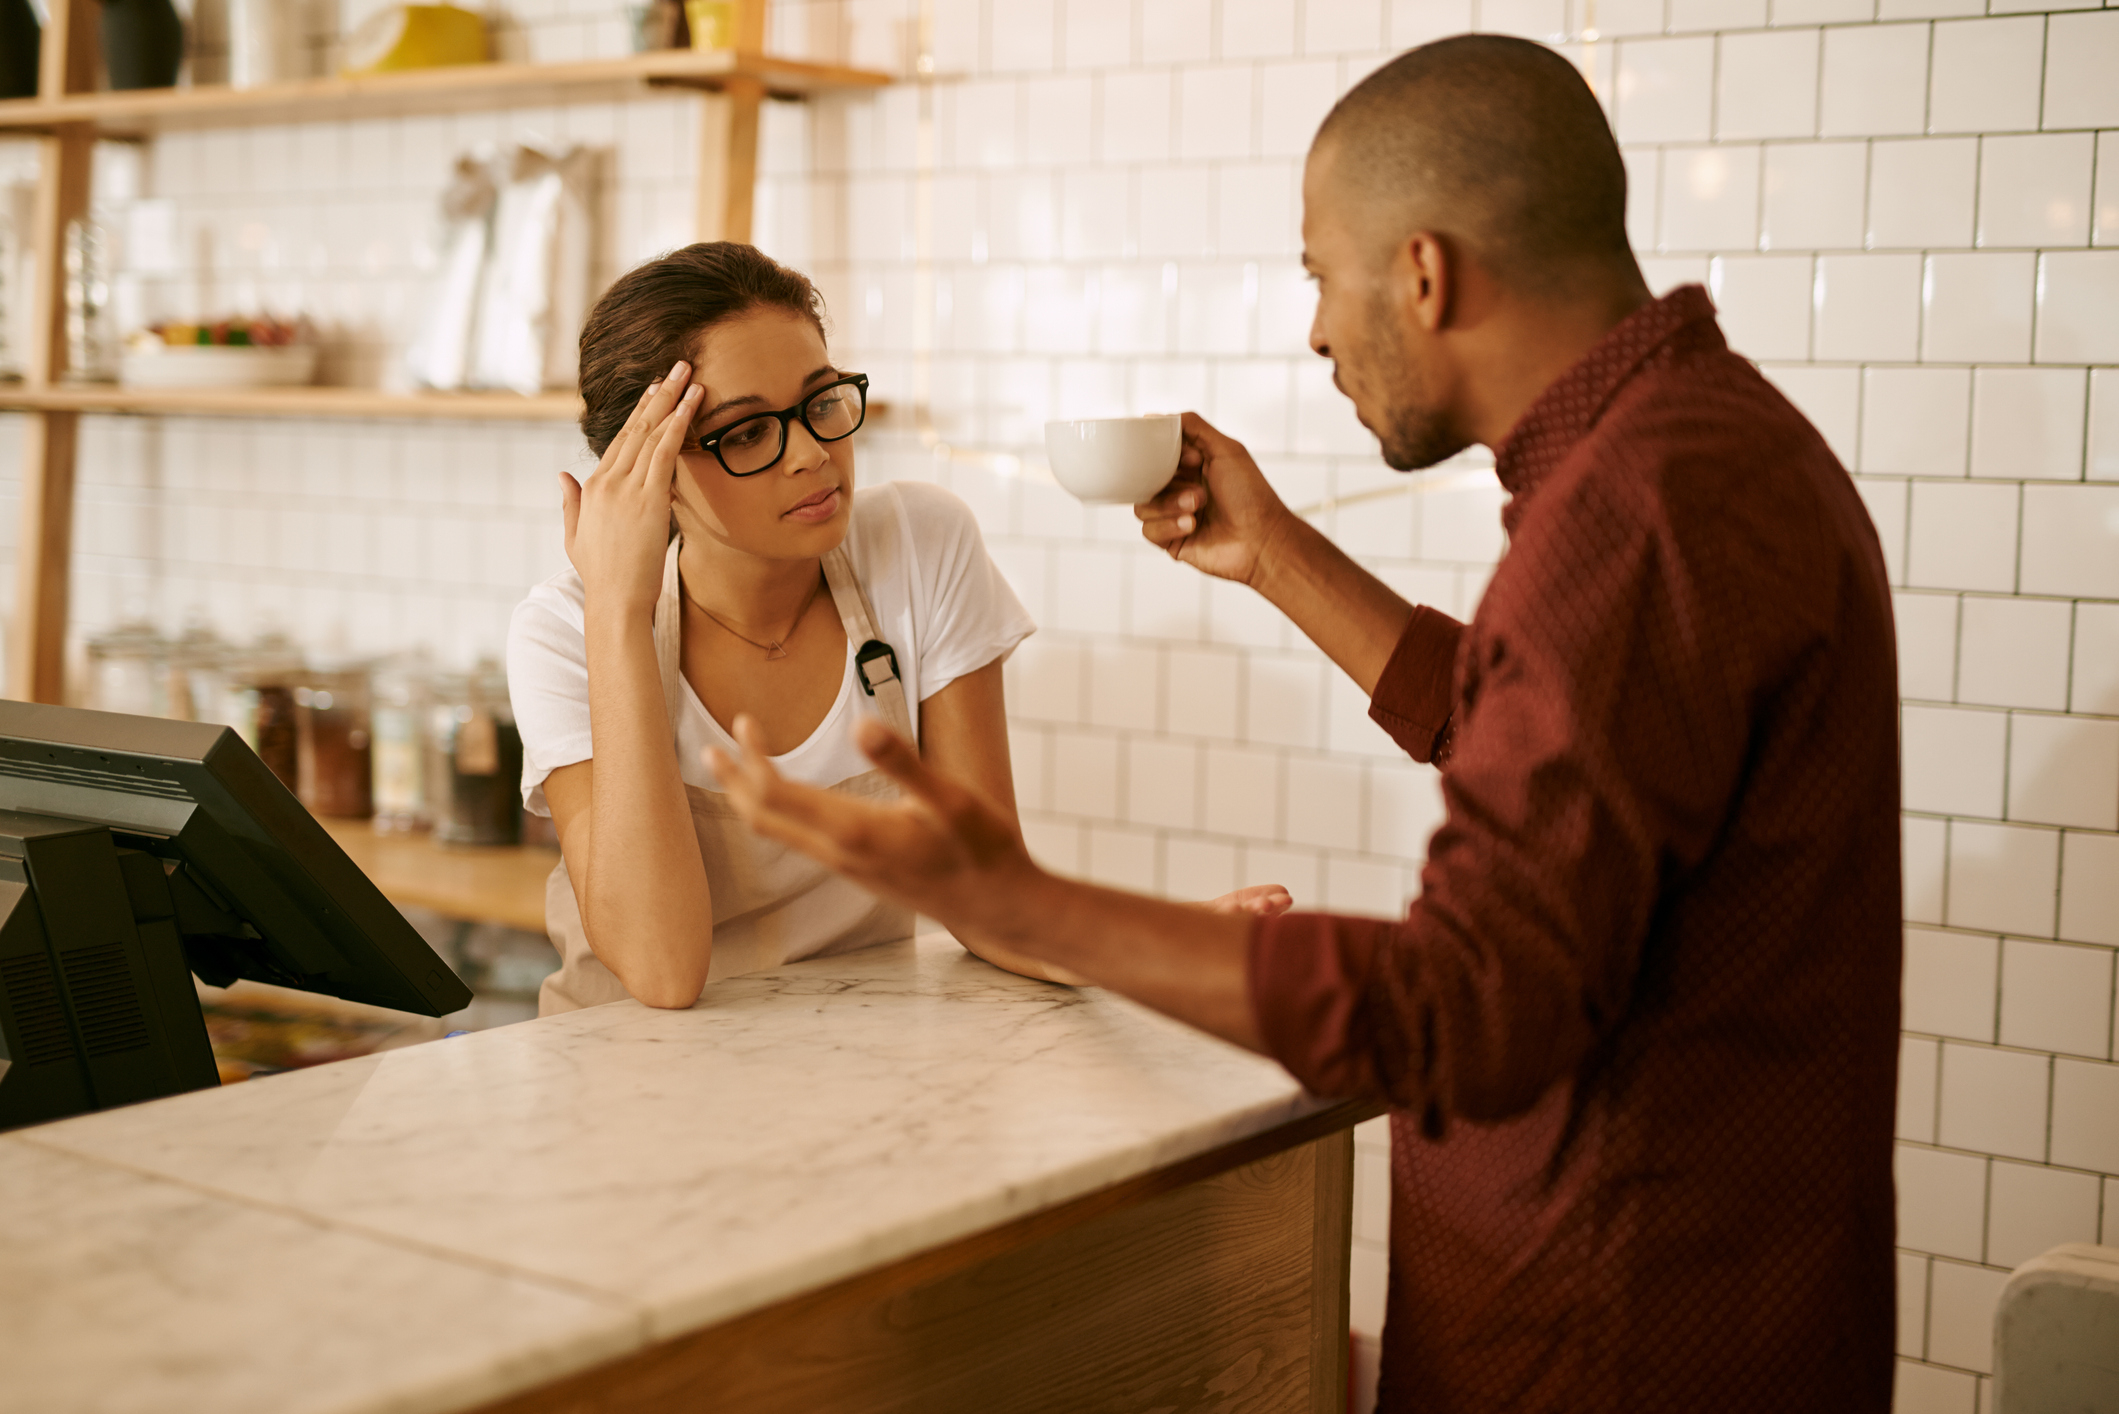 Woman at counter listens to man gesturing with coffee cup, both in casual attire